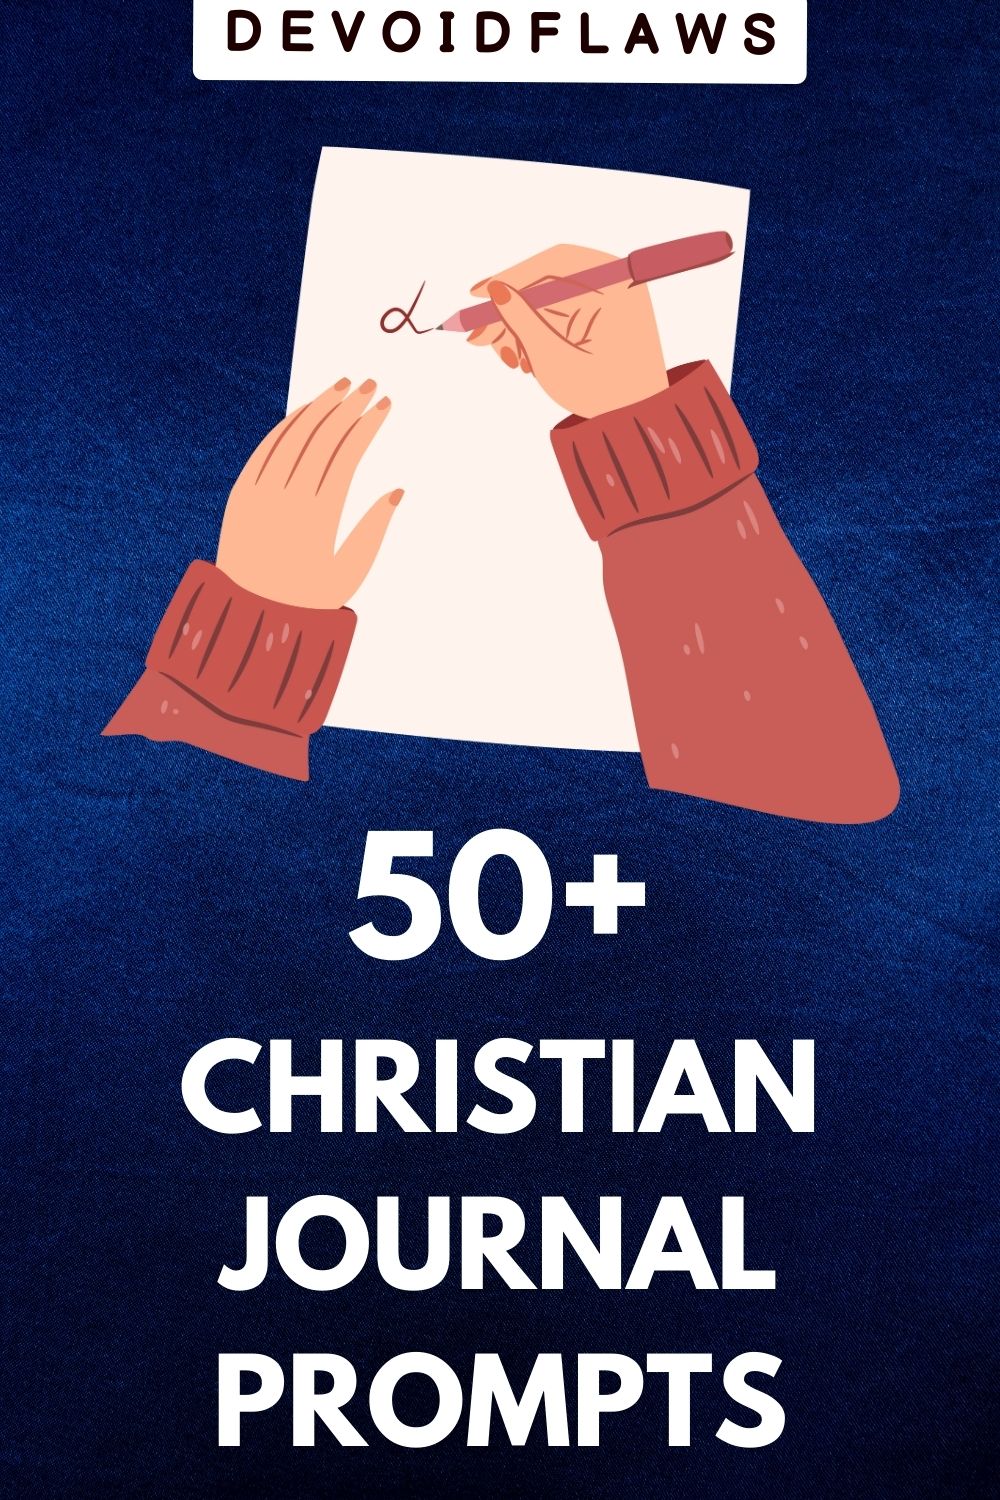 blue background image with text "50+ christian journal prompts"